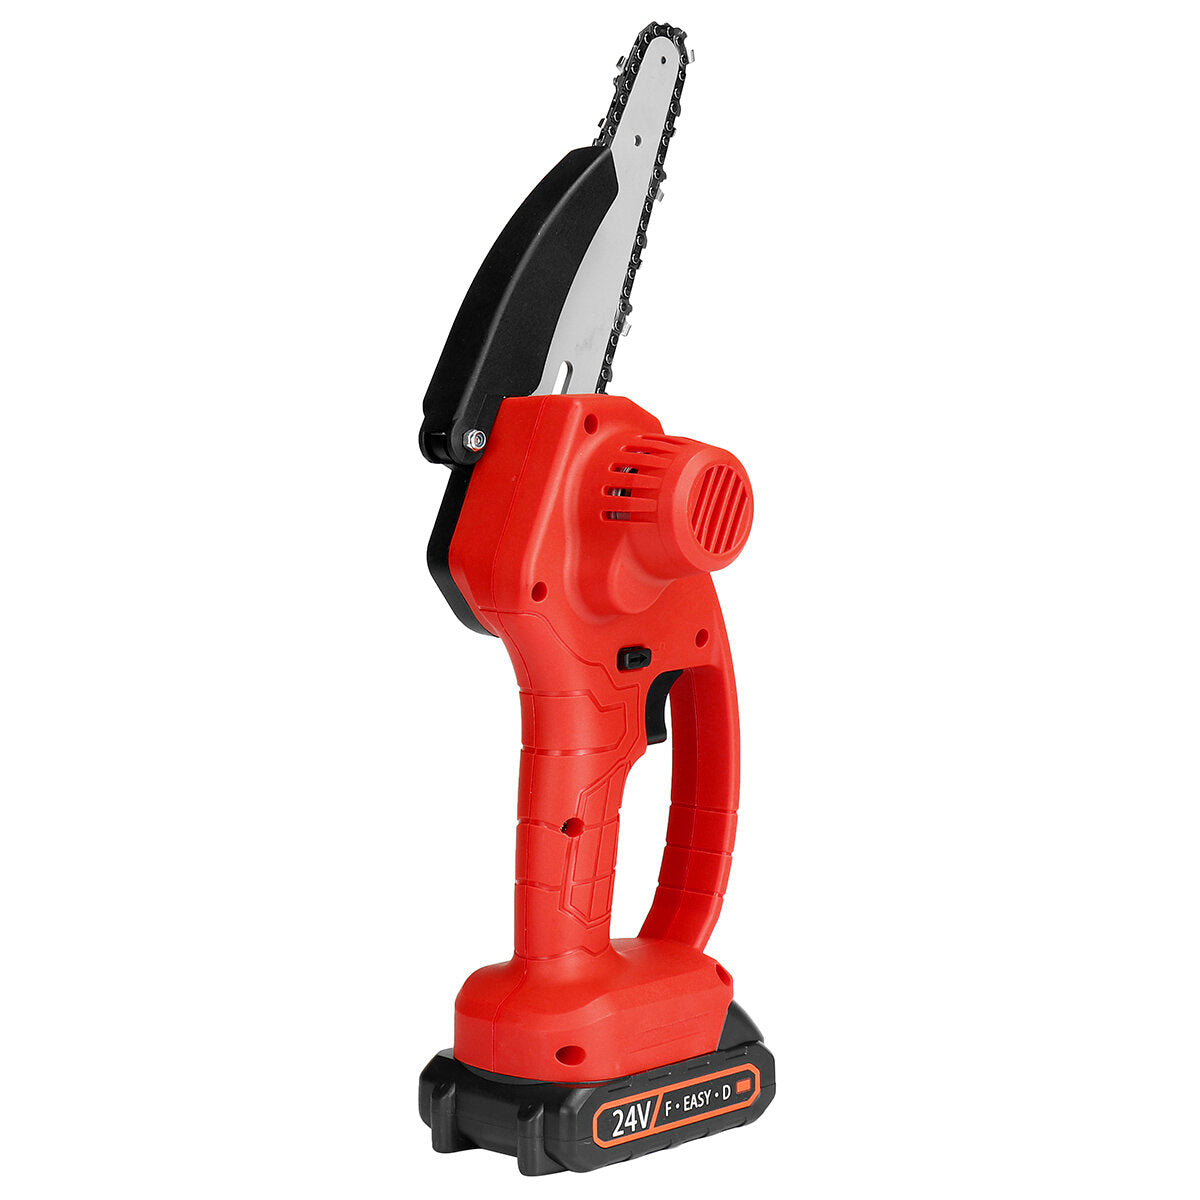 Handheld Mini Rechargable Chainsaw 6" Electric Chain Saws Stepless Speed Change Wood Work Cutter